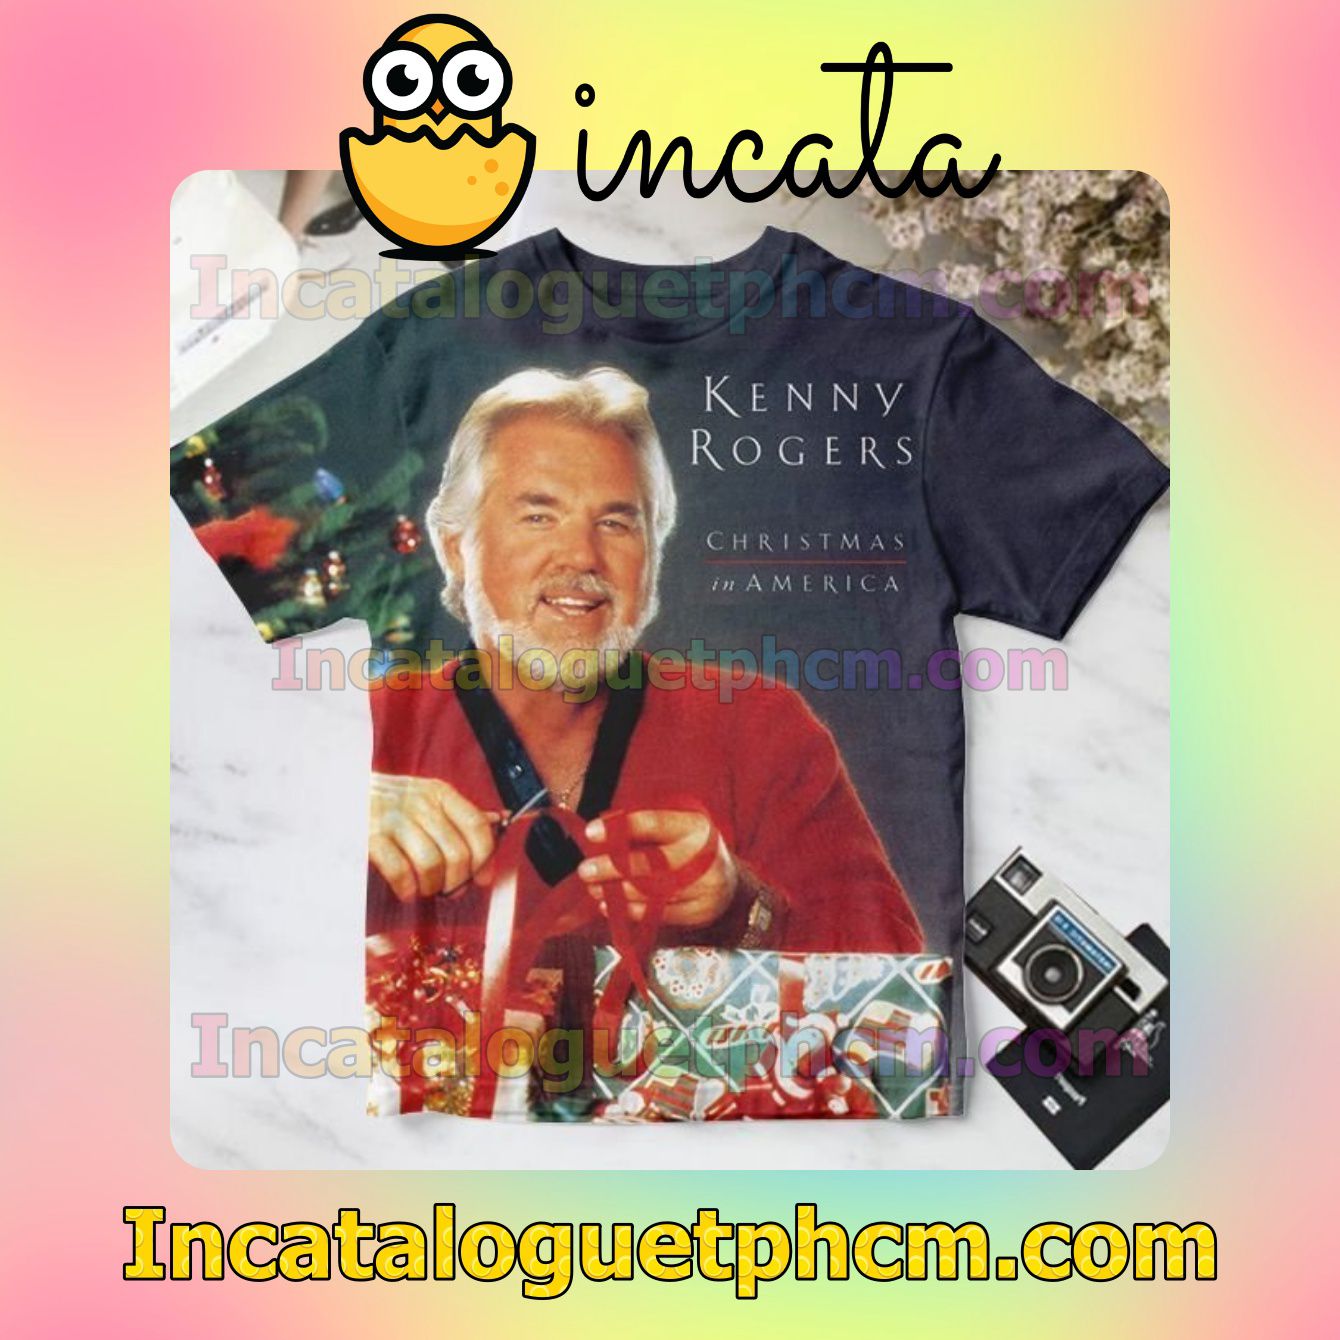 Kenny Rogers Christmas In America Album Cover Personalized Shirt